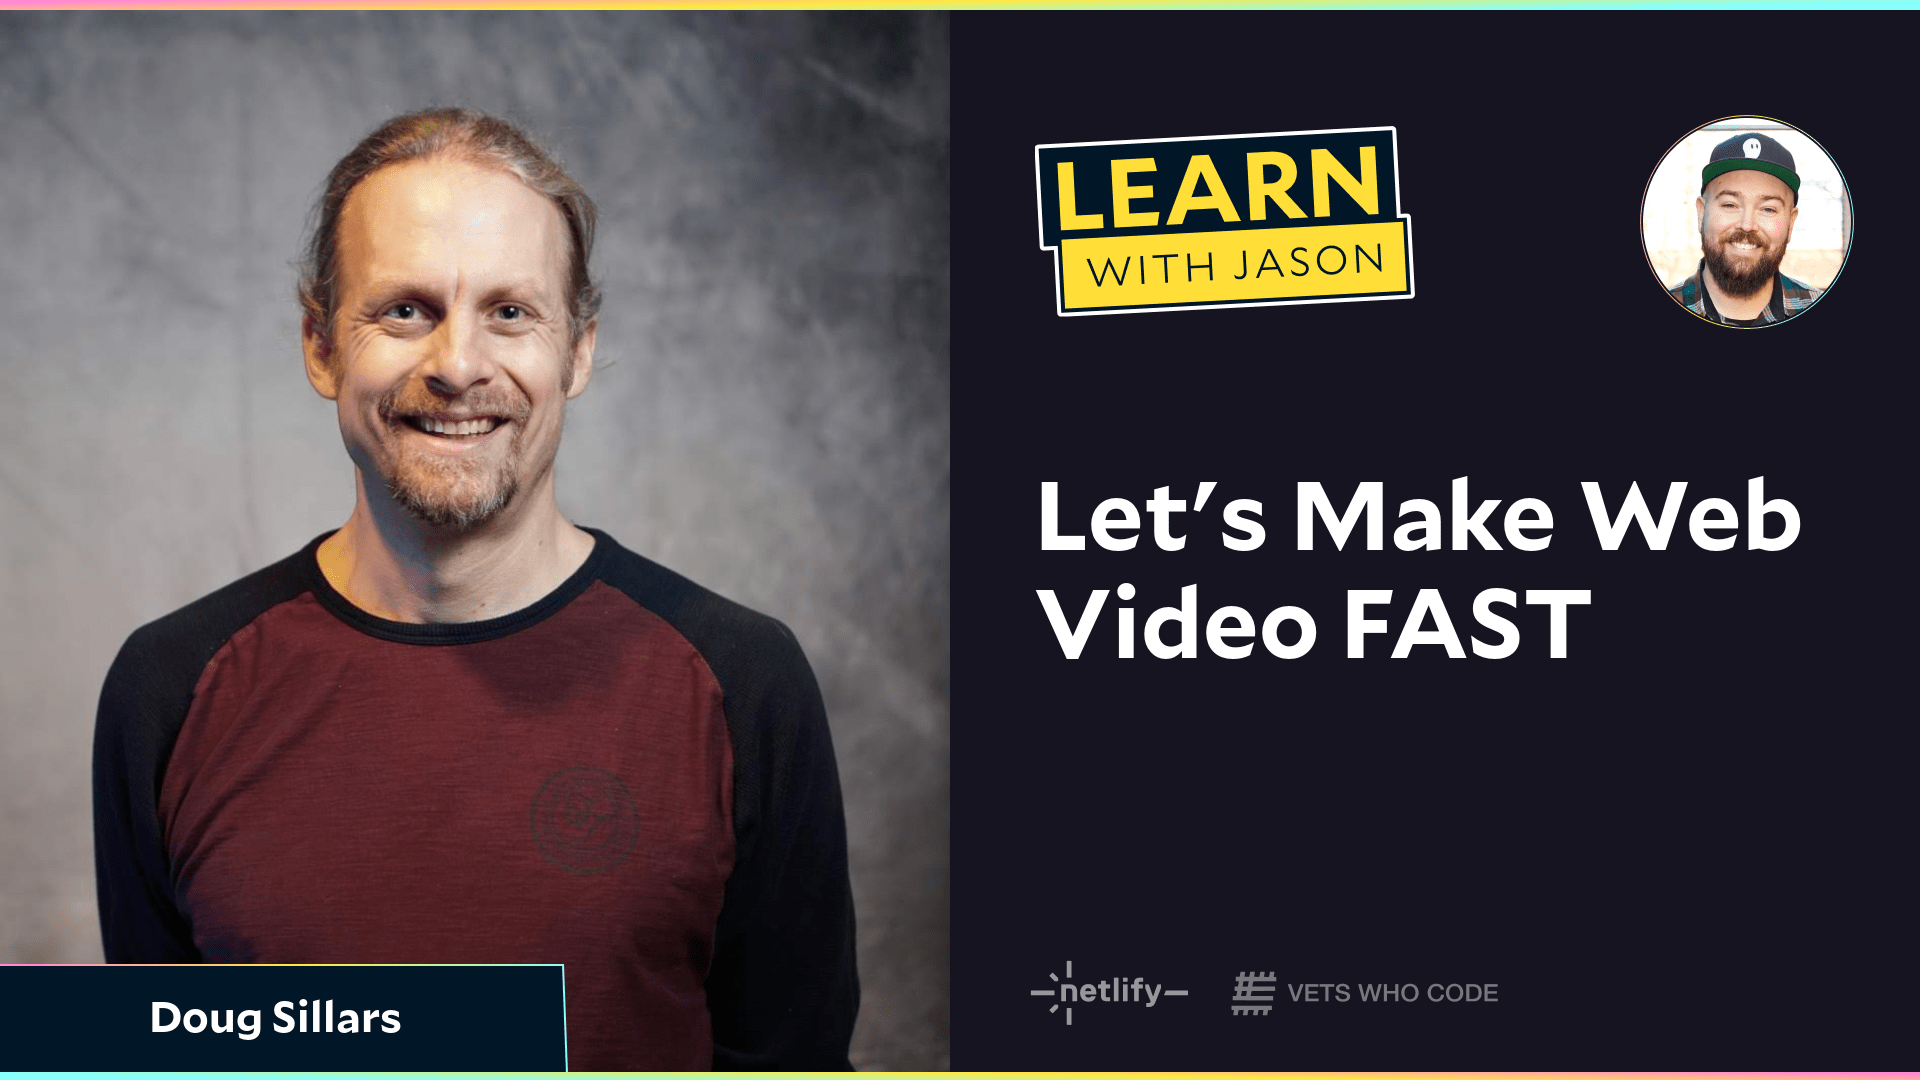 Let's Make Web Video FAST (with Doug Sillars)